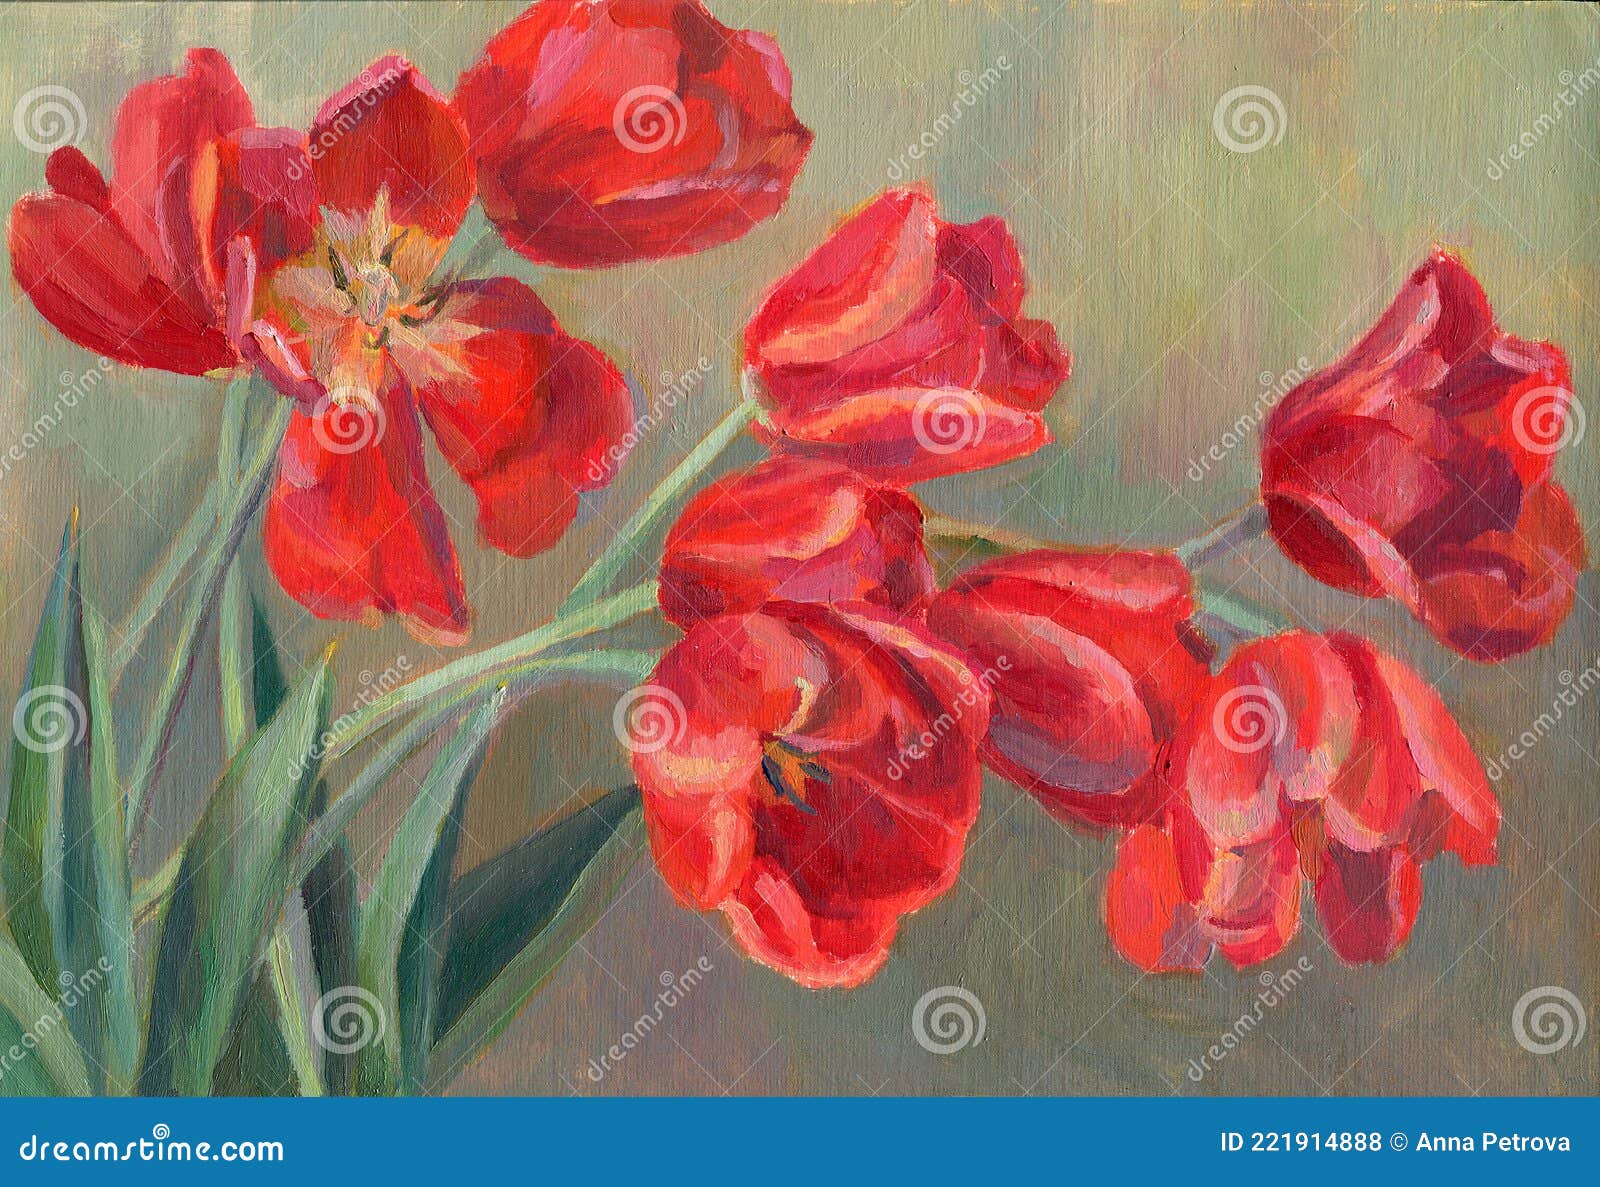 red tulips drawing oil